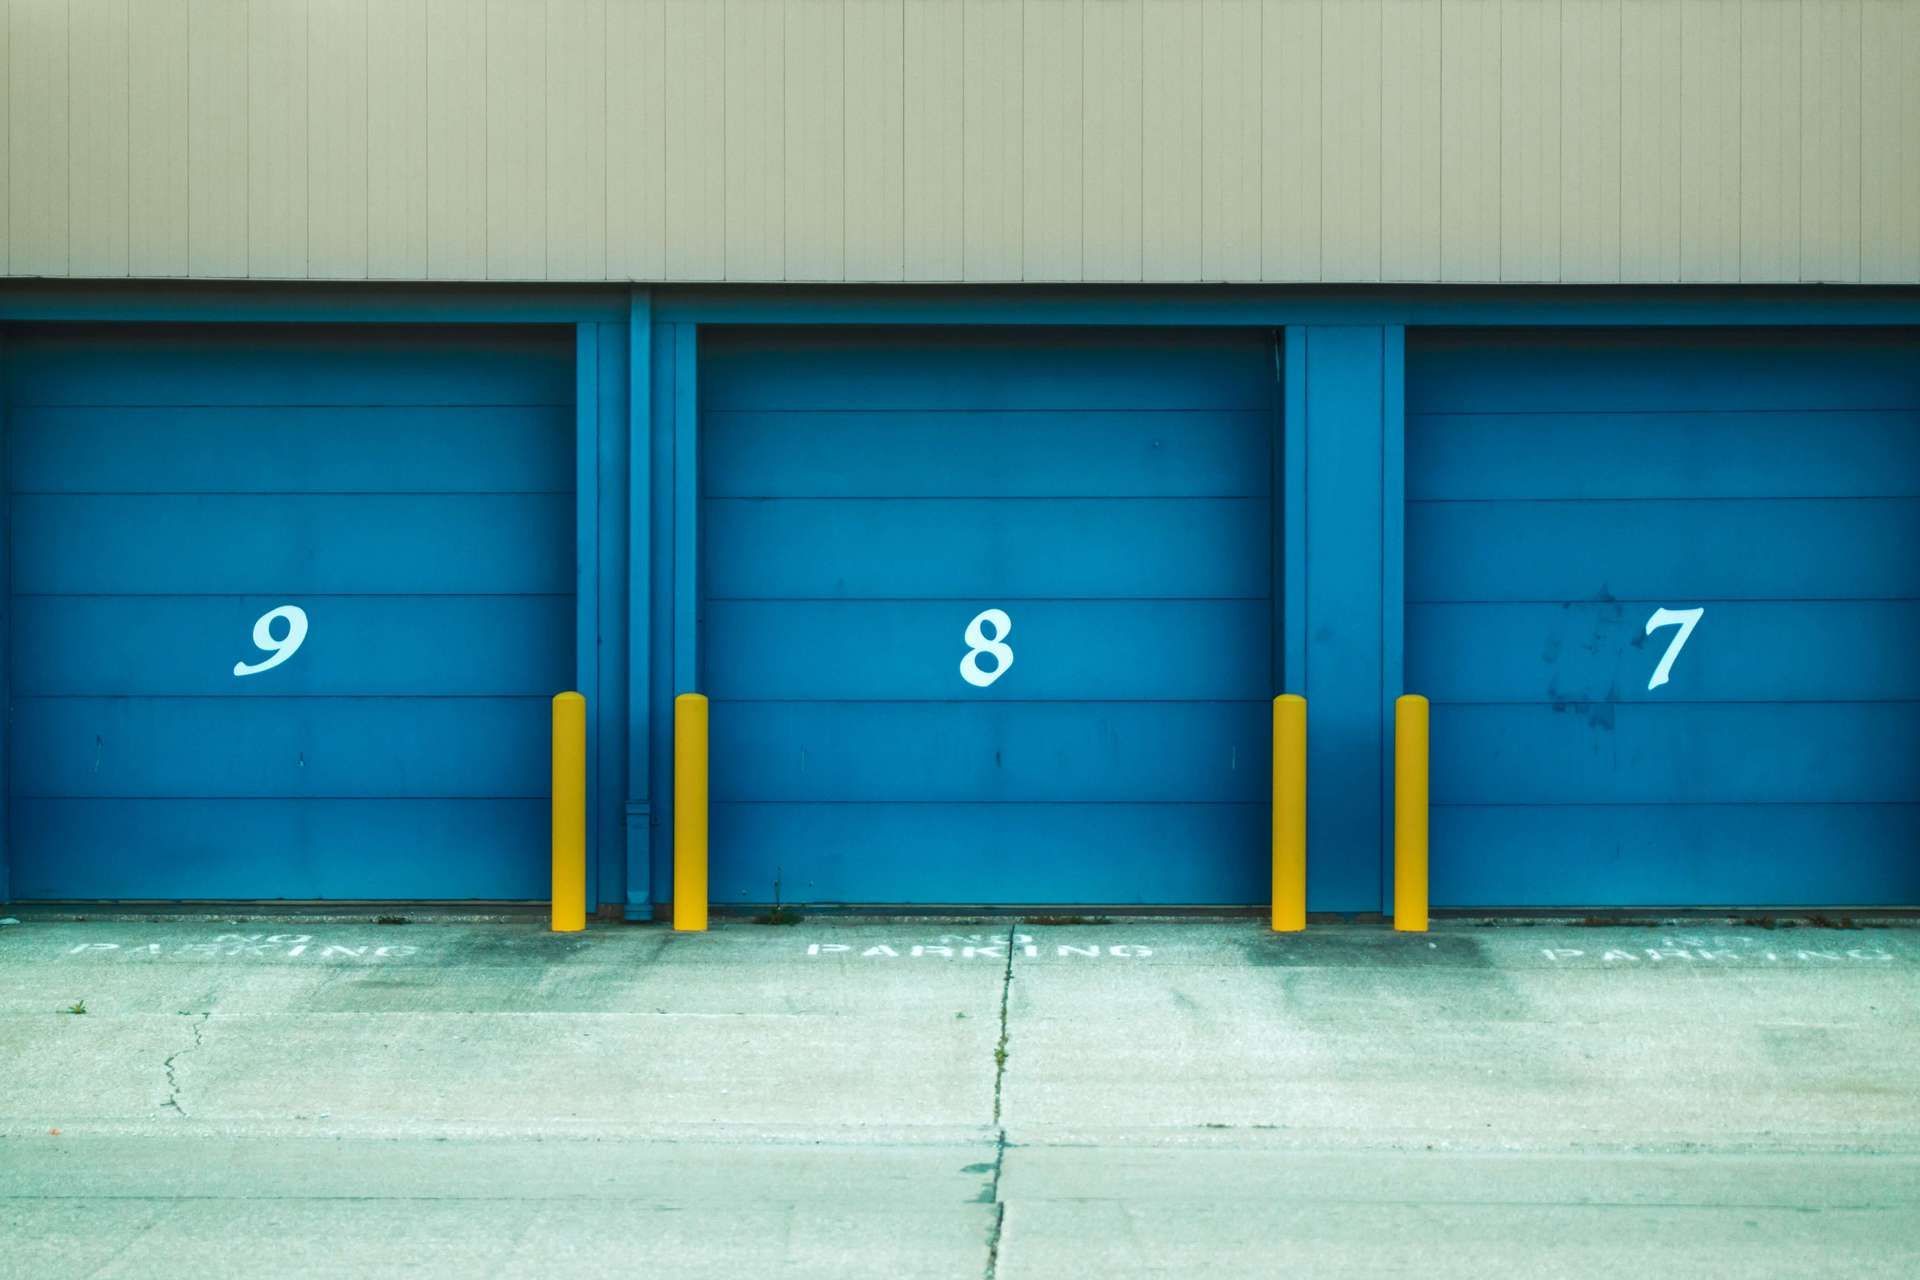 Three blue garage doors with the numbers 9 8 and 7 on them